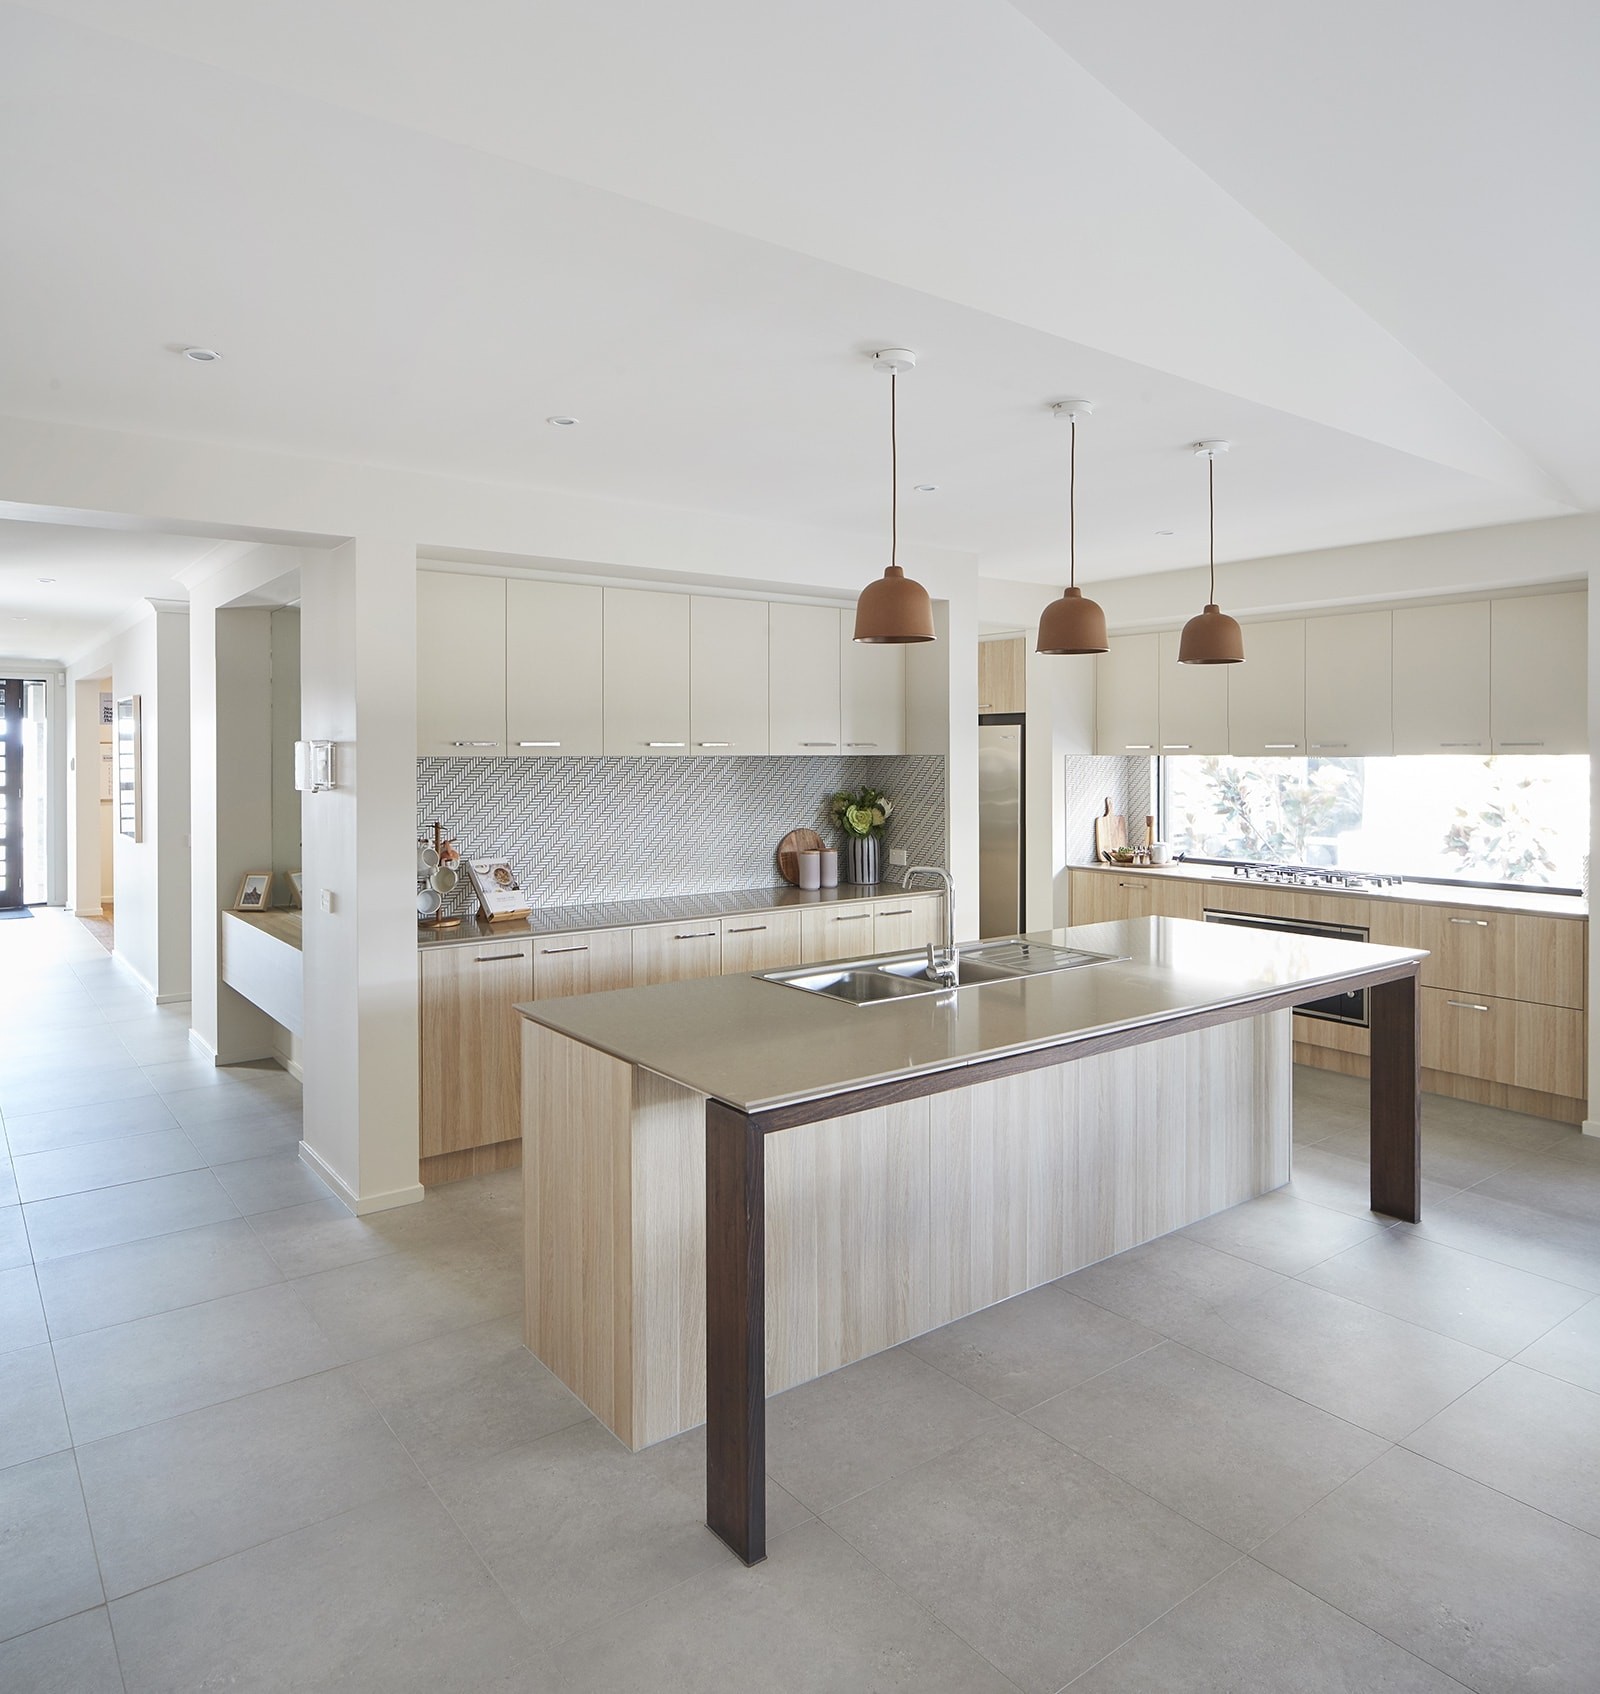 energy efficient home designs kitchen by metricon homes with terracotta pendants